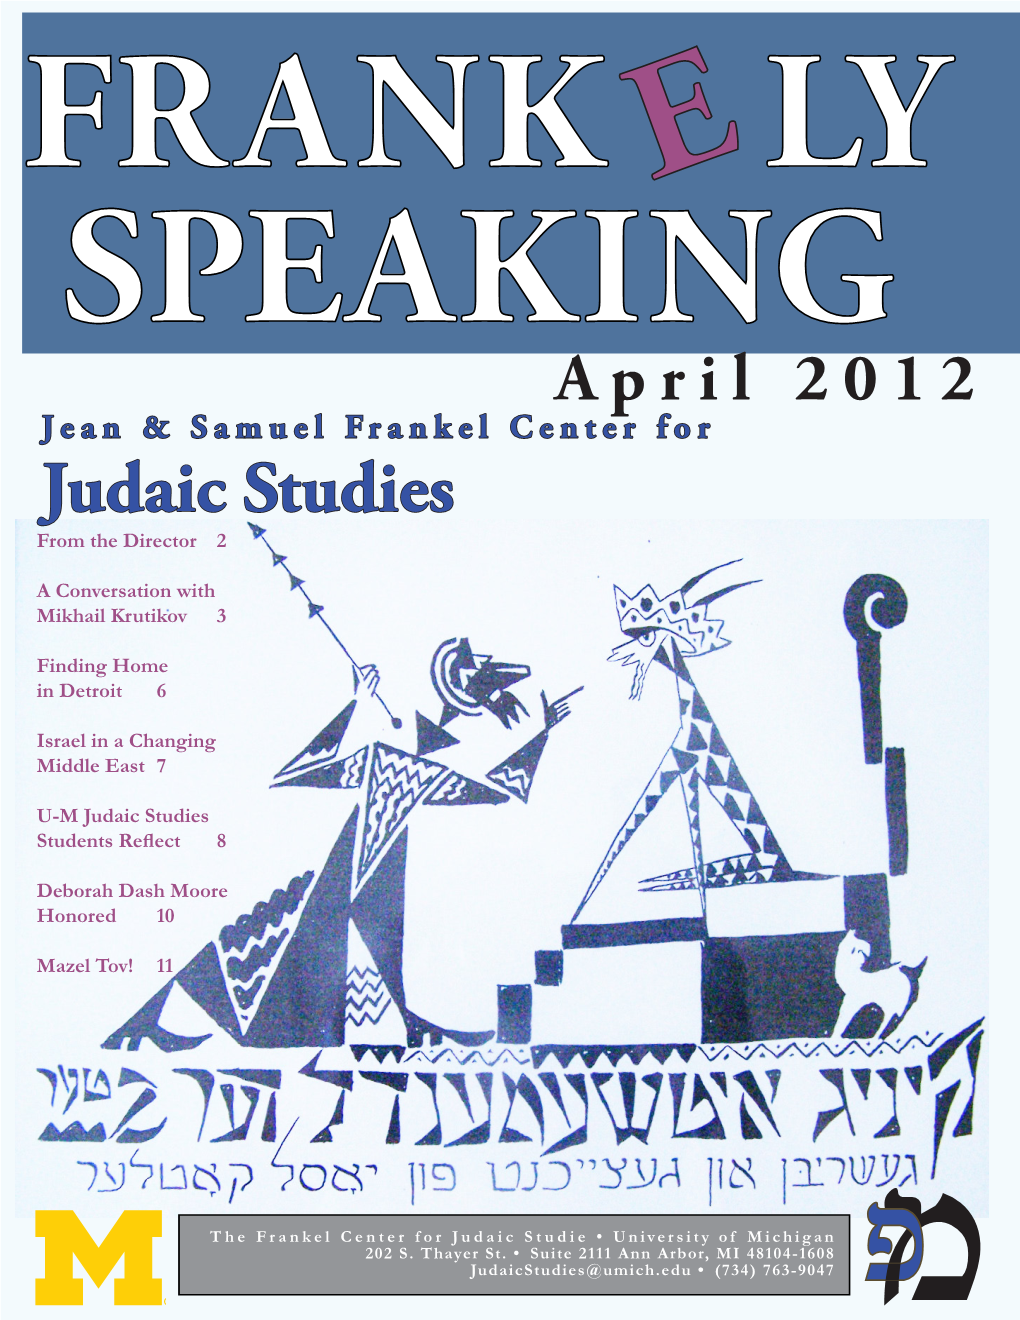 Judaic Studies from the Director 2